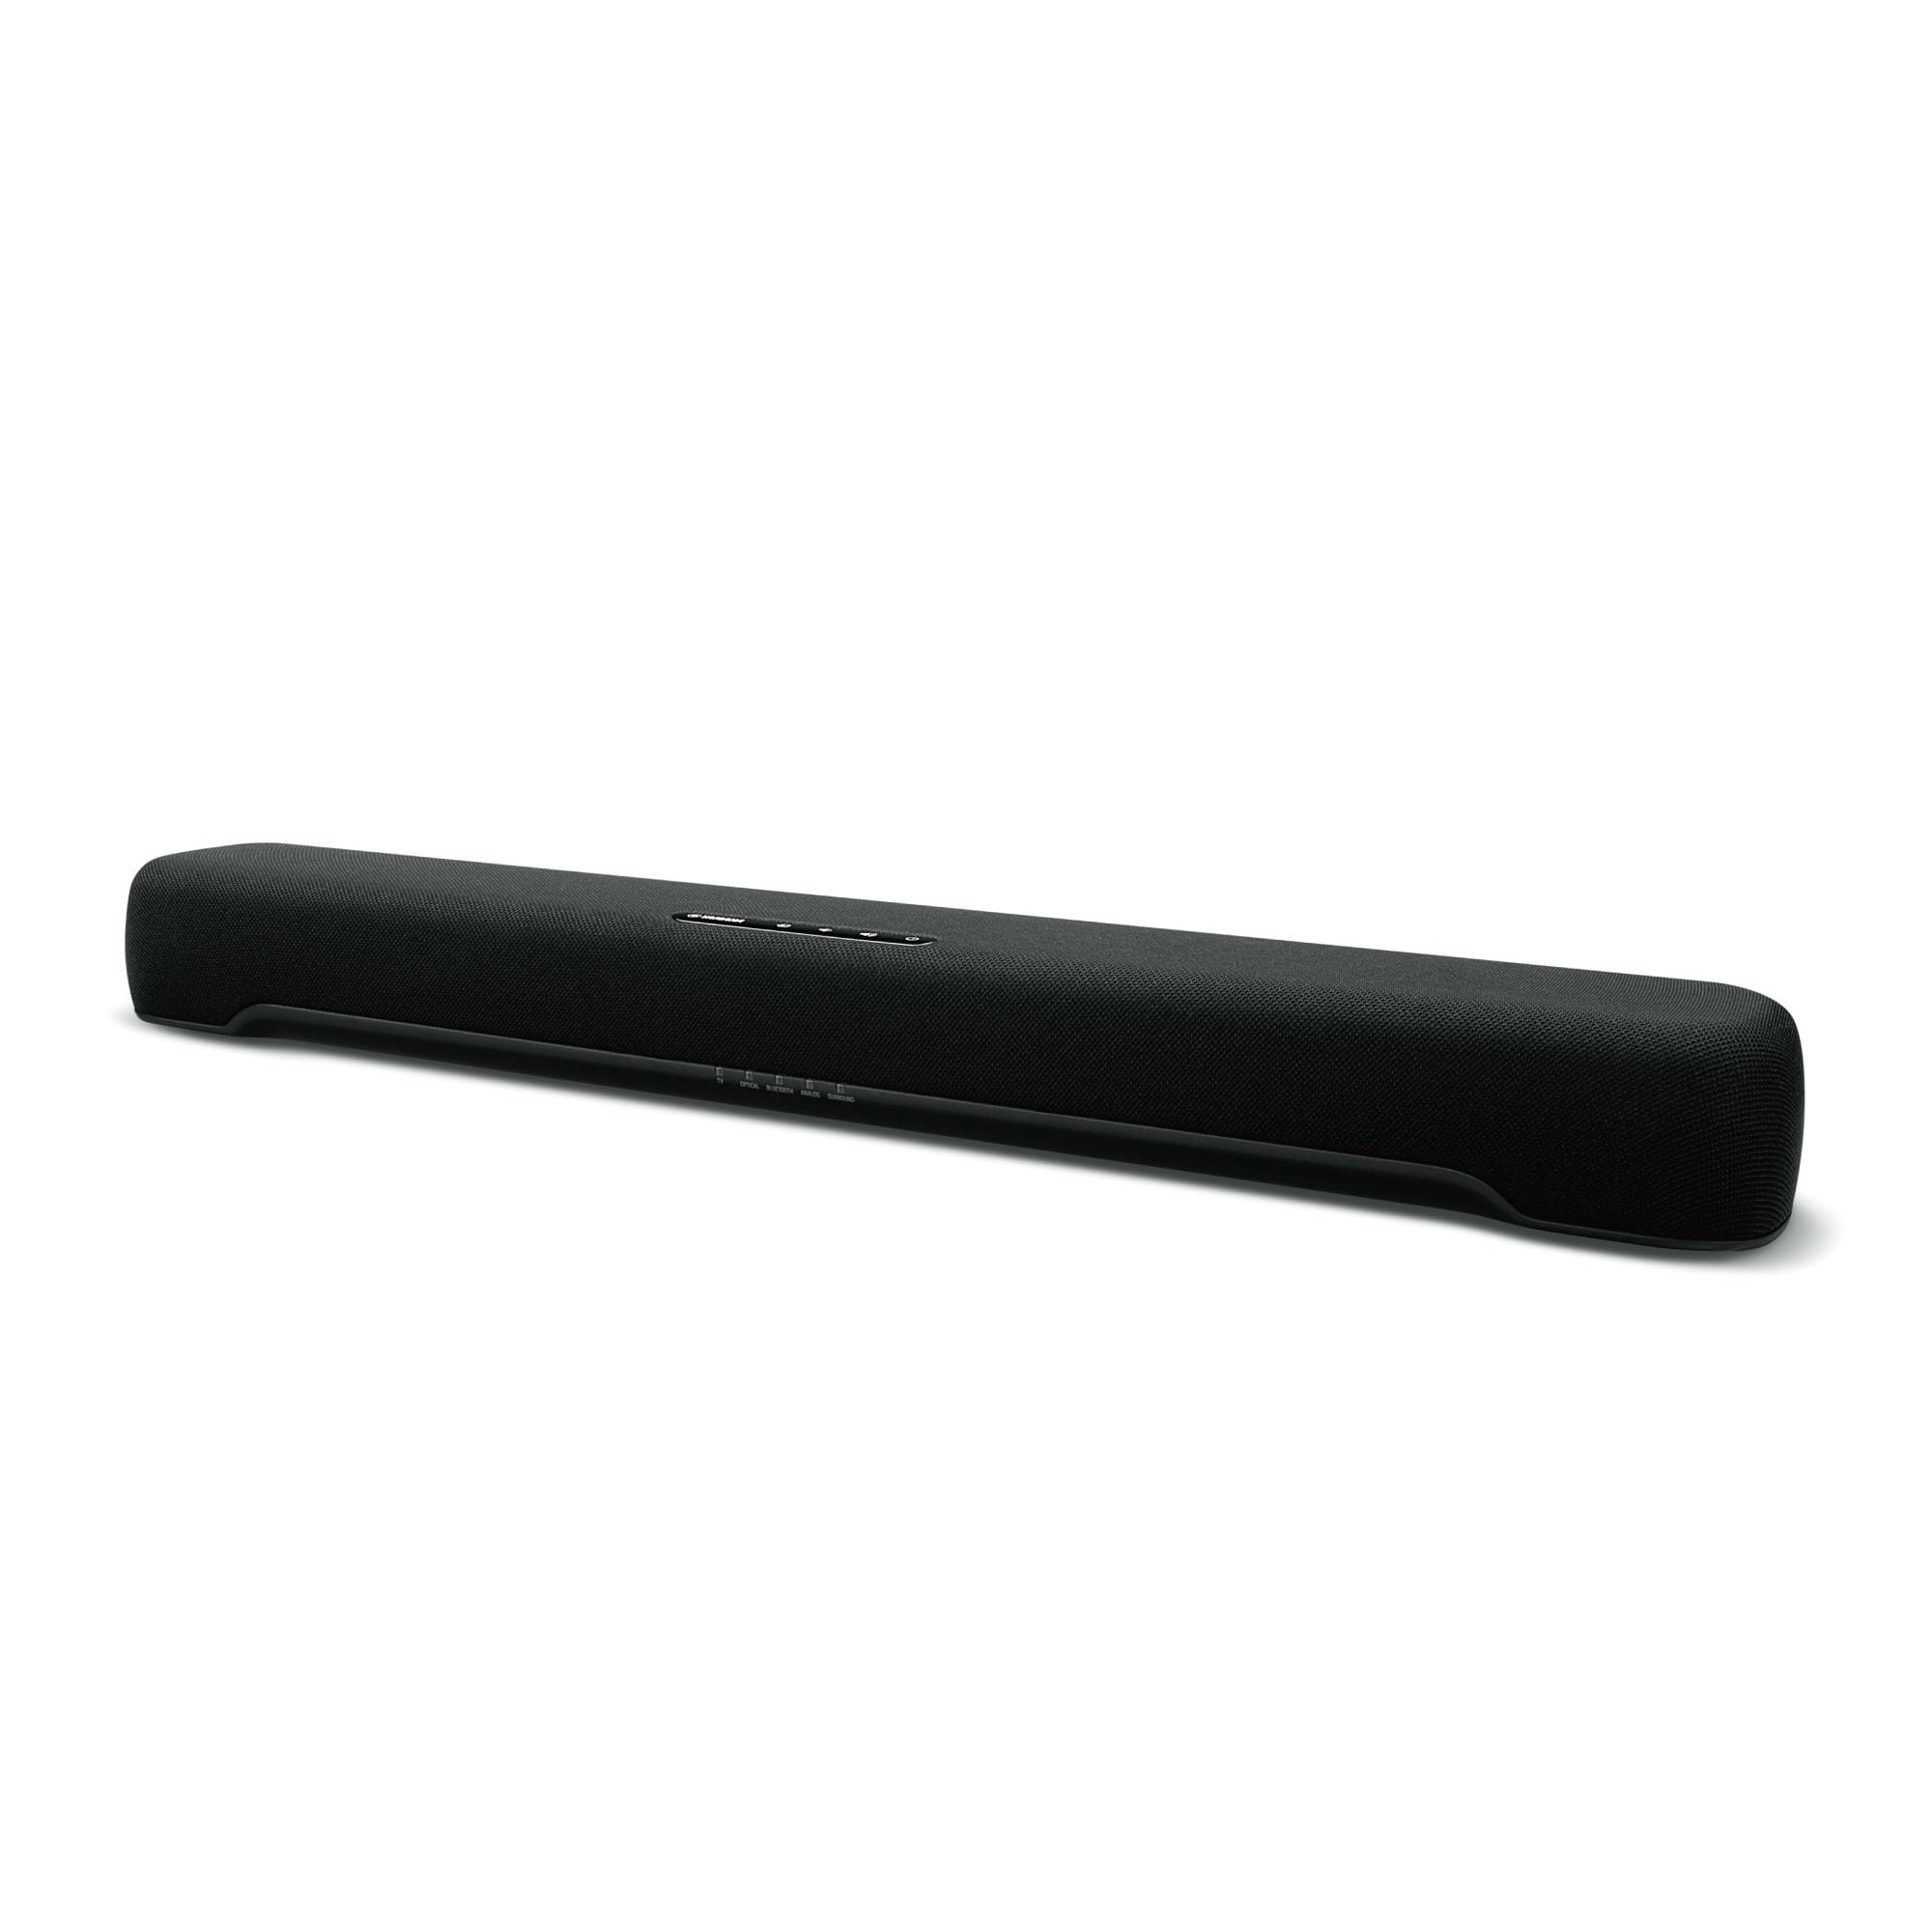 Specs: SR-C20A Sound Bar with Built-in Subwoofer - Yamaha USA